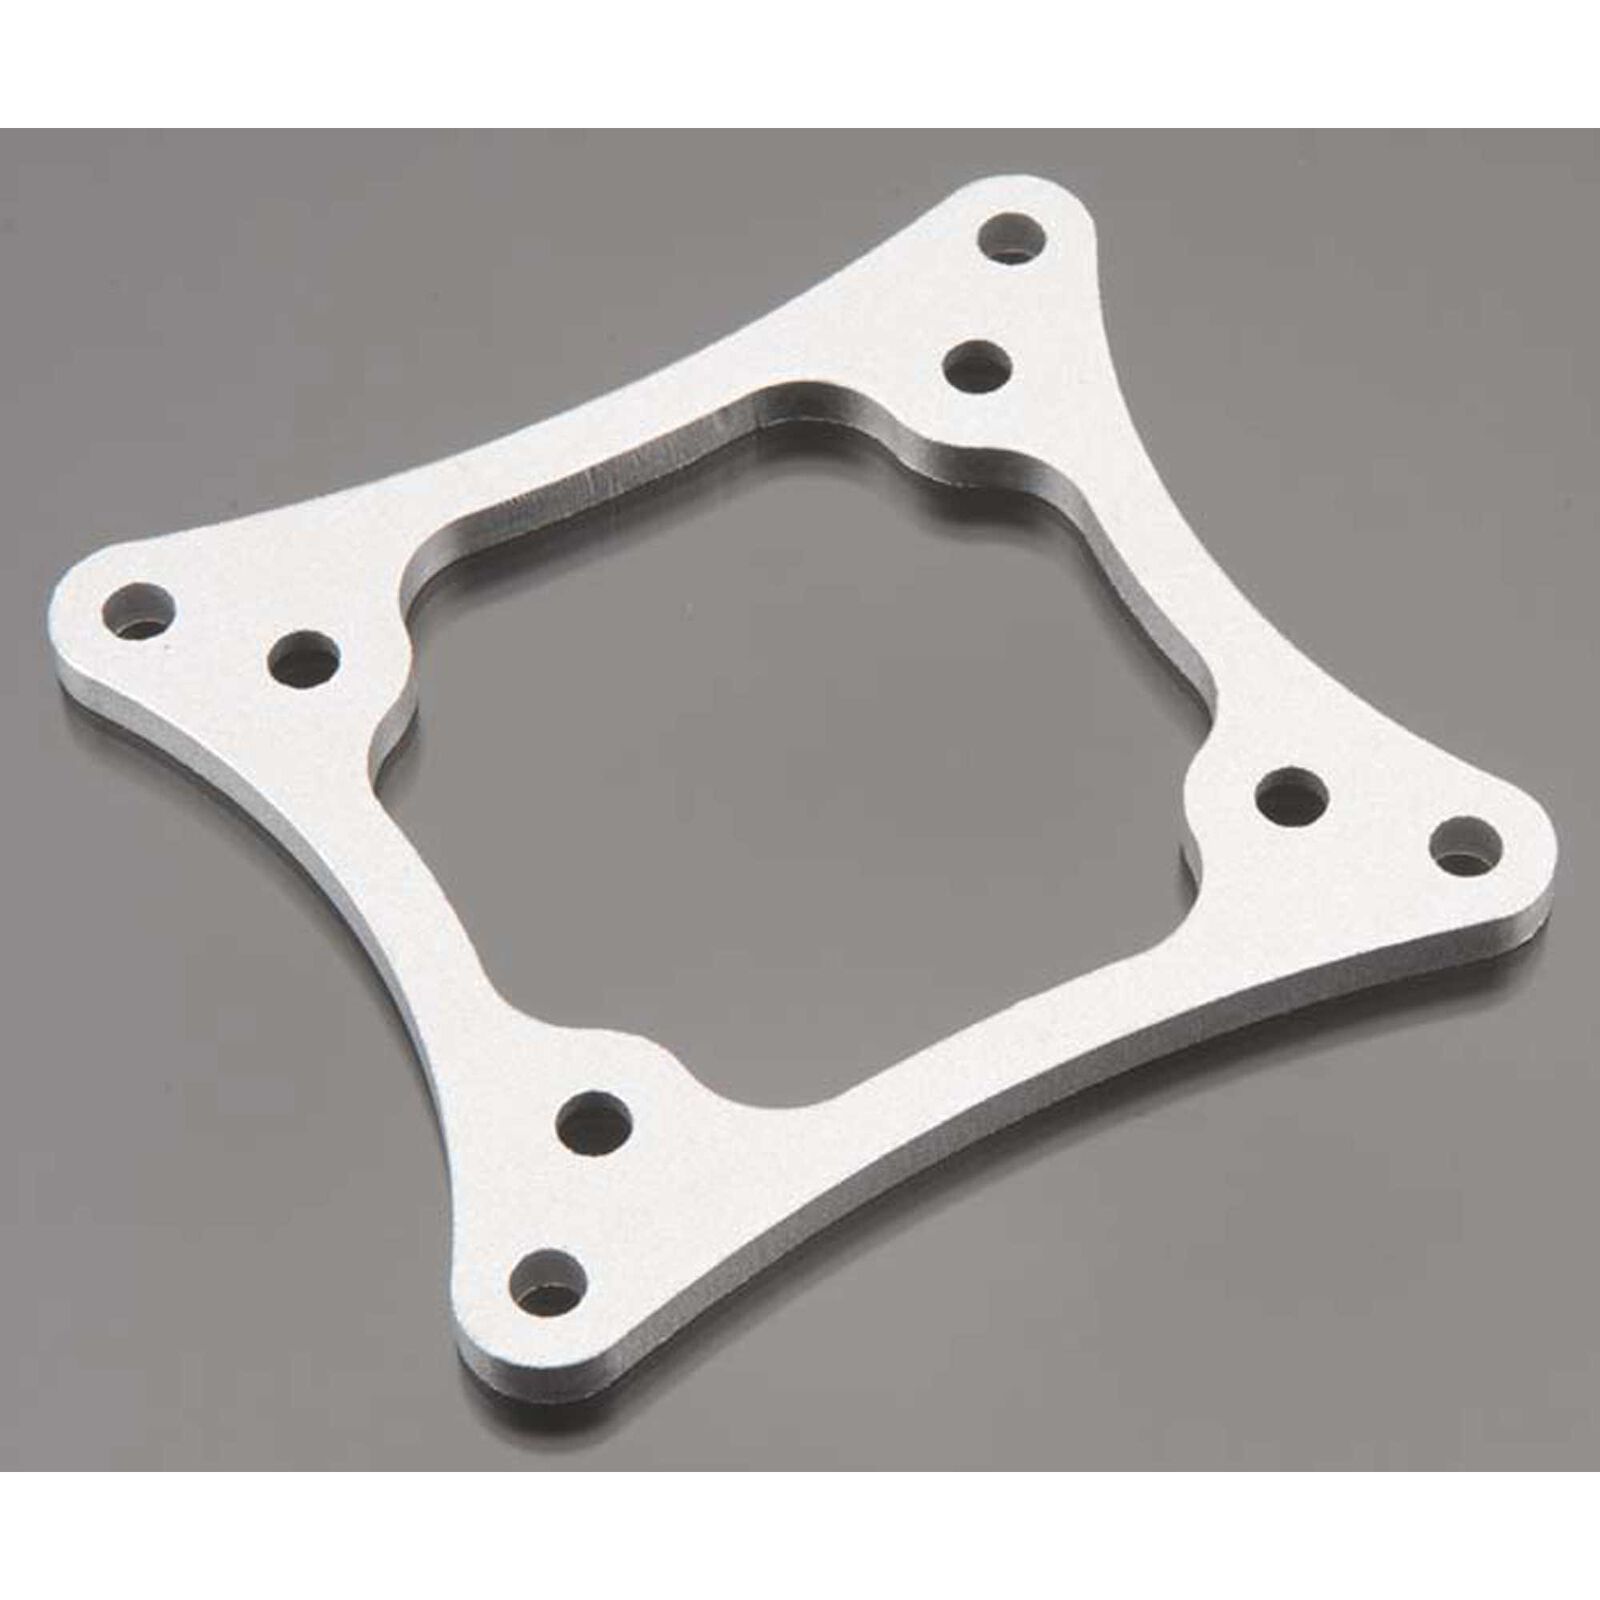 Engine Mount Plate: DLE-170